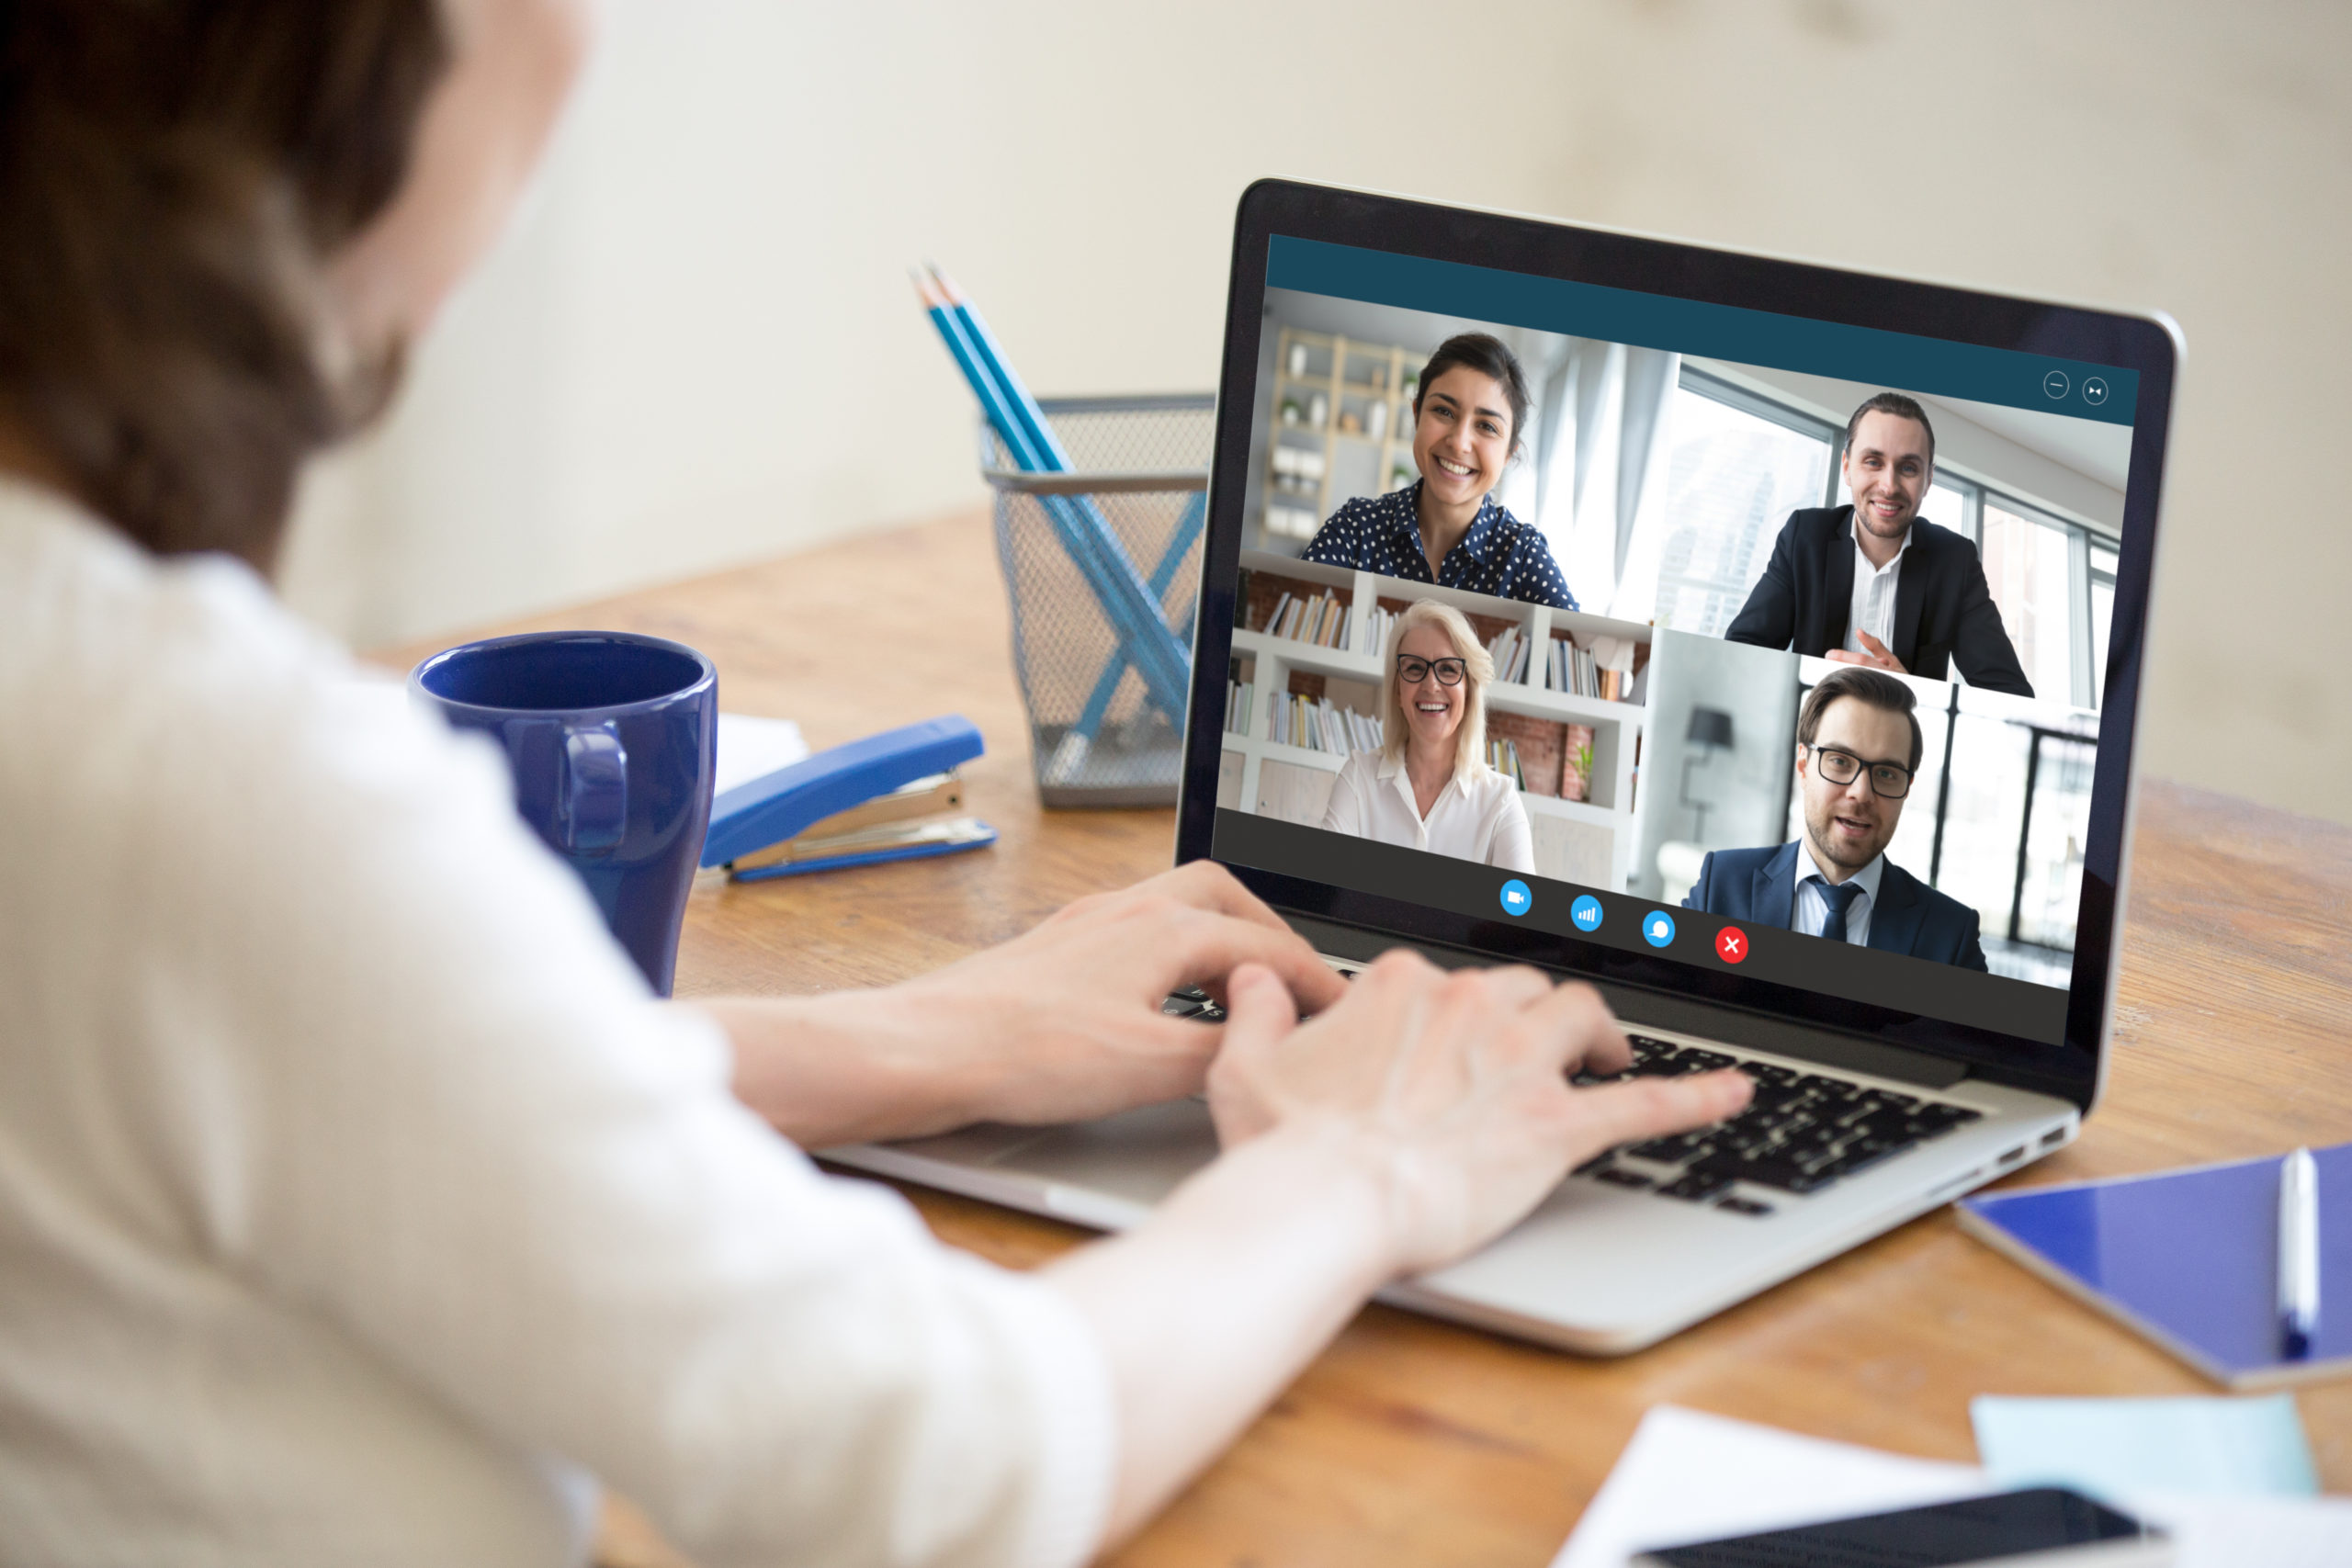 Diverse people take part in group video call pc screen cam app view over woman shoulder, seated at desk. Solve business issues distantly during coronavirus pandemic outbreak, videoconferencing concept